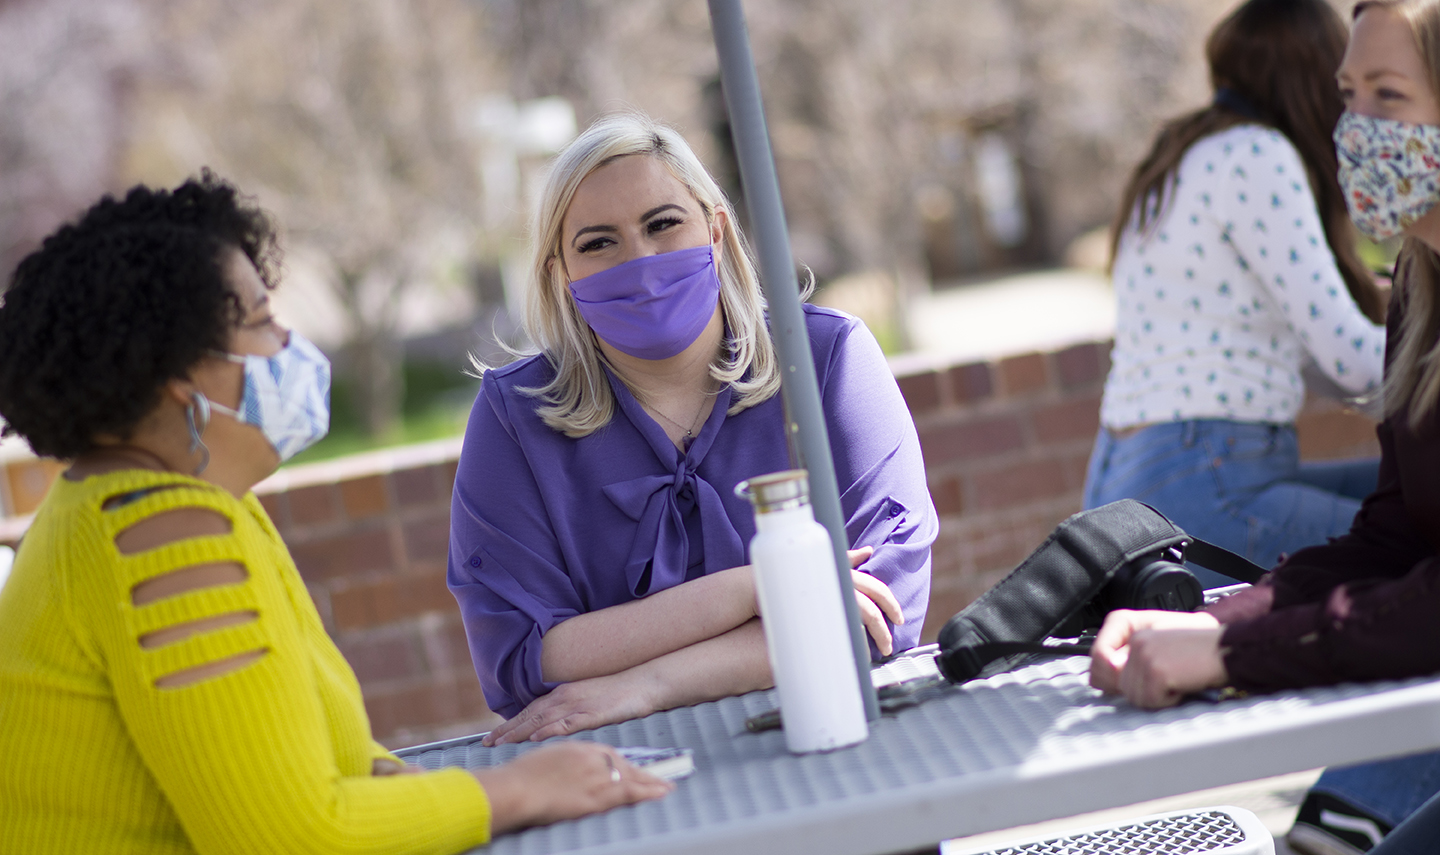 Three students at outdoor table wearing masks.